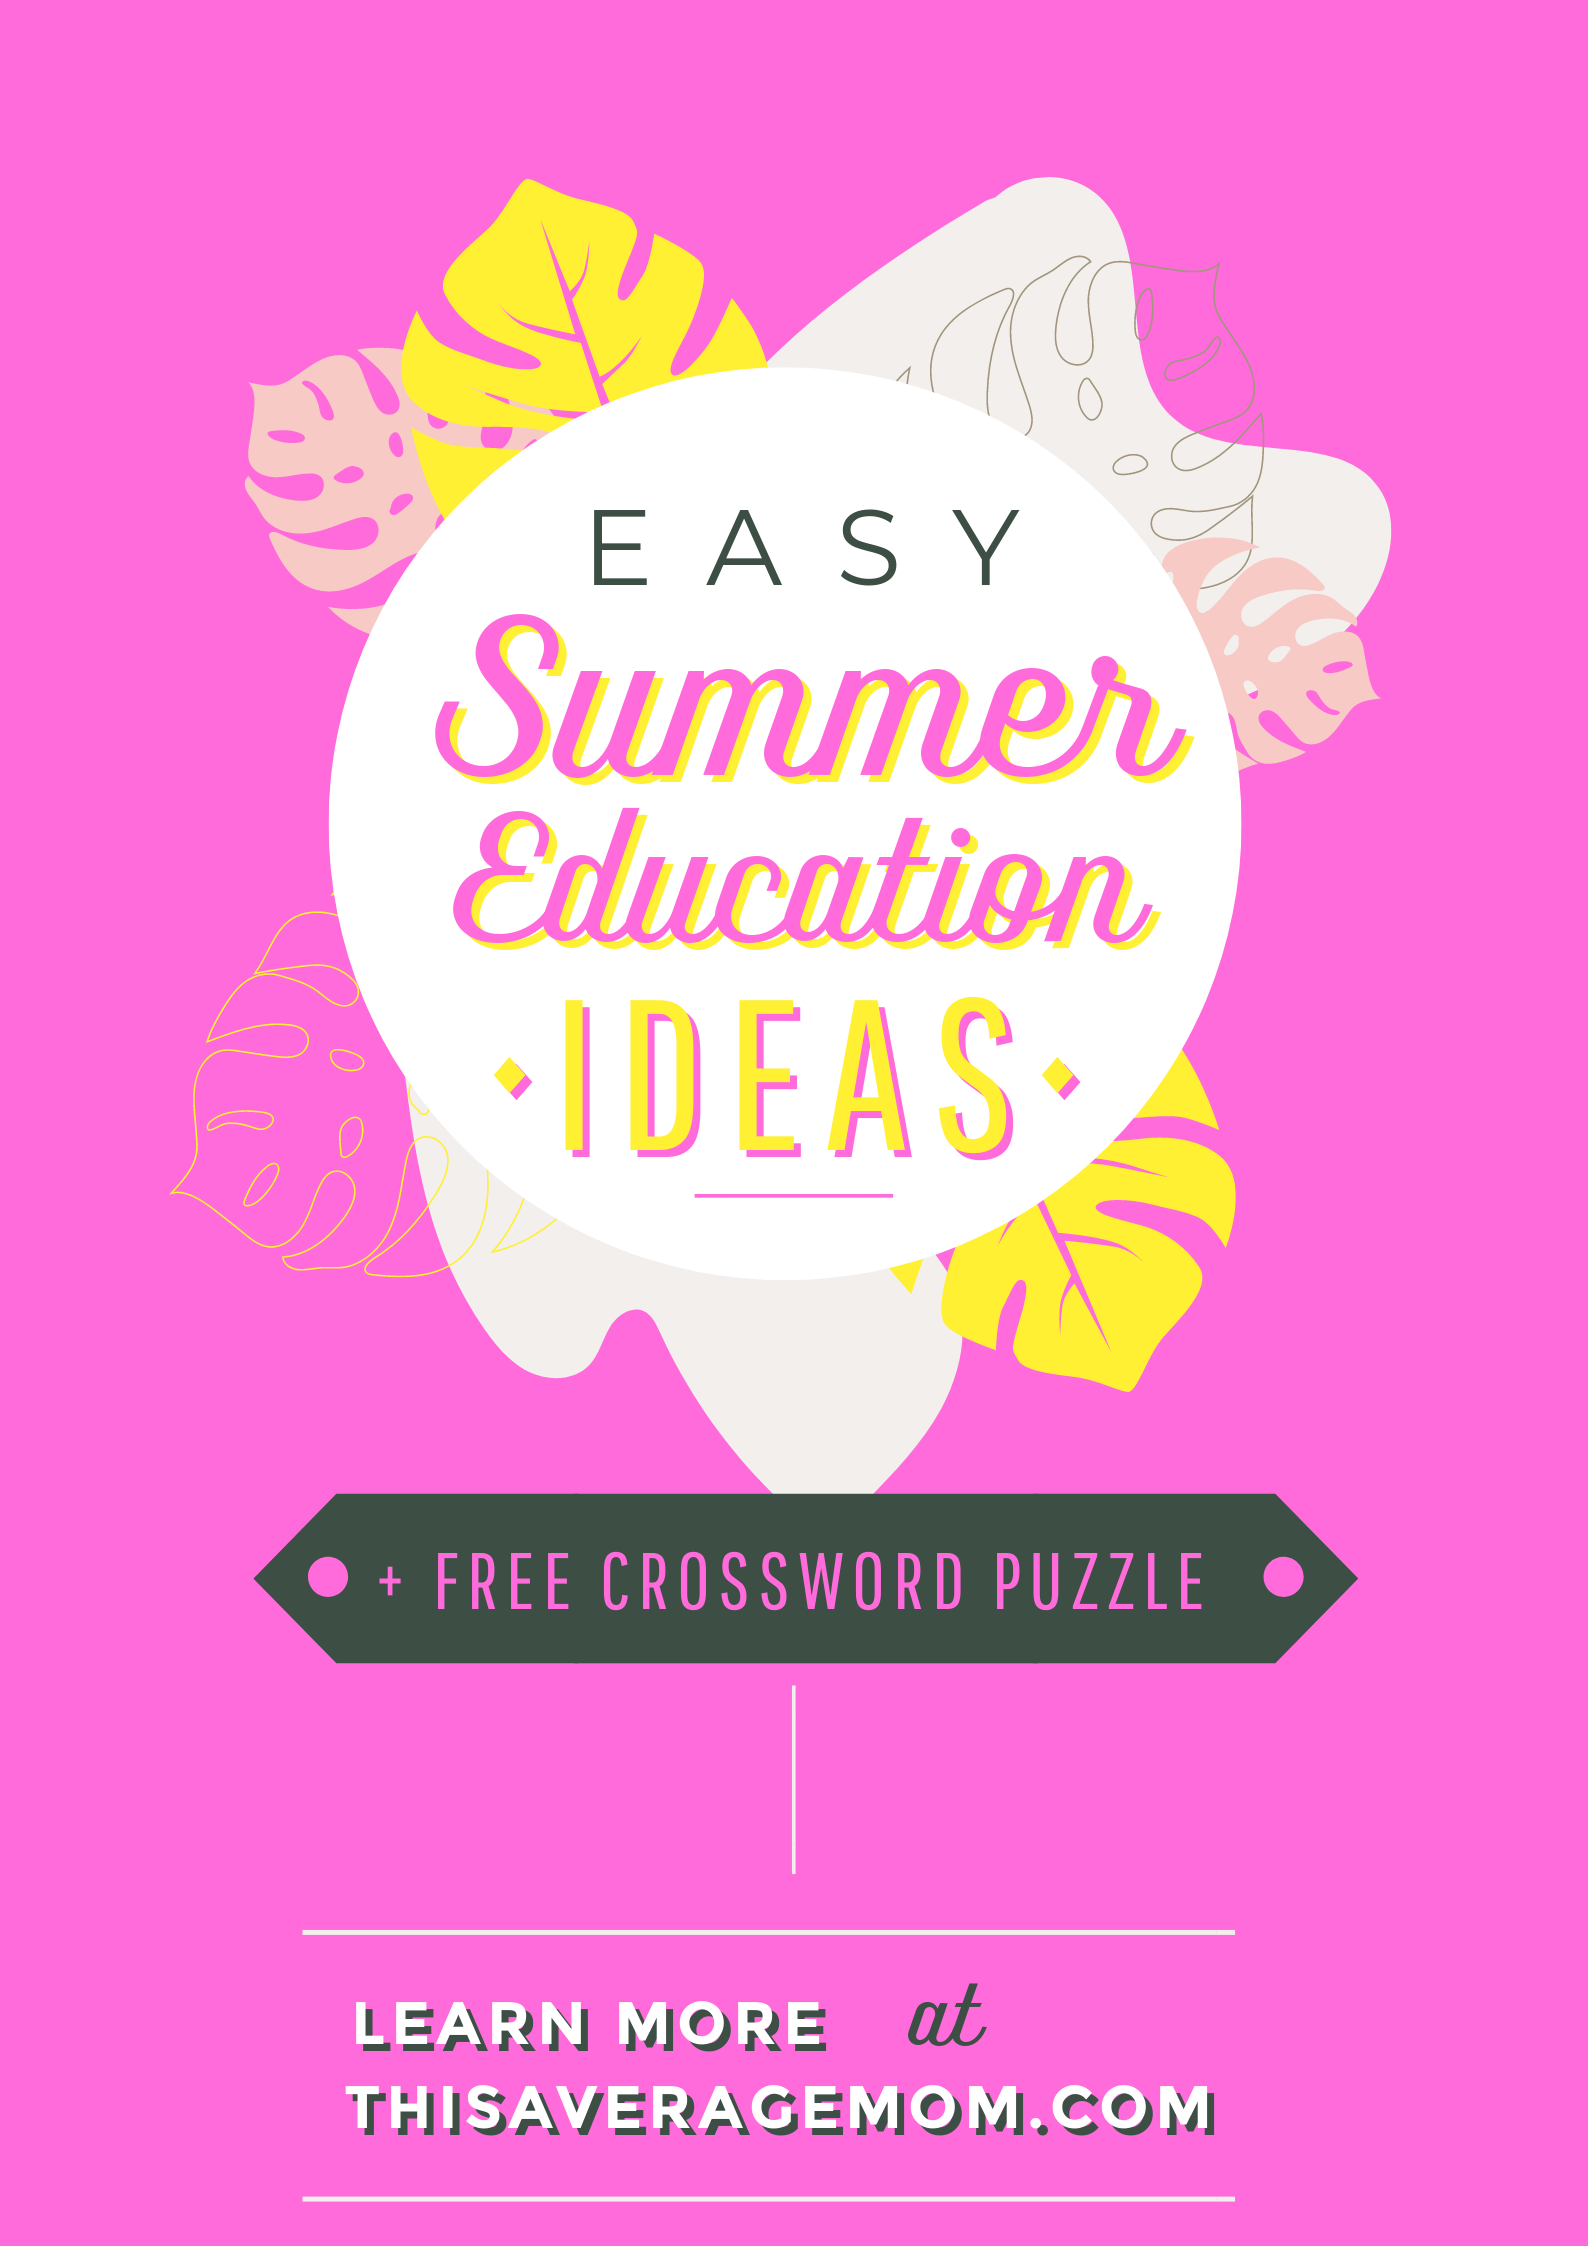 Want a free crossword puzzle worksheet for your kids this summer? Need a couple easy ways to help your young kids discover new things and learn all season long? Want to hear about a contest where the winner receives money toward education? I’ve got you covered in today’s blog post.